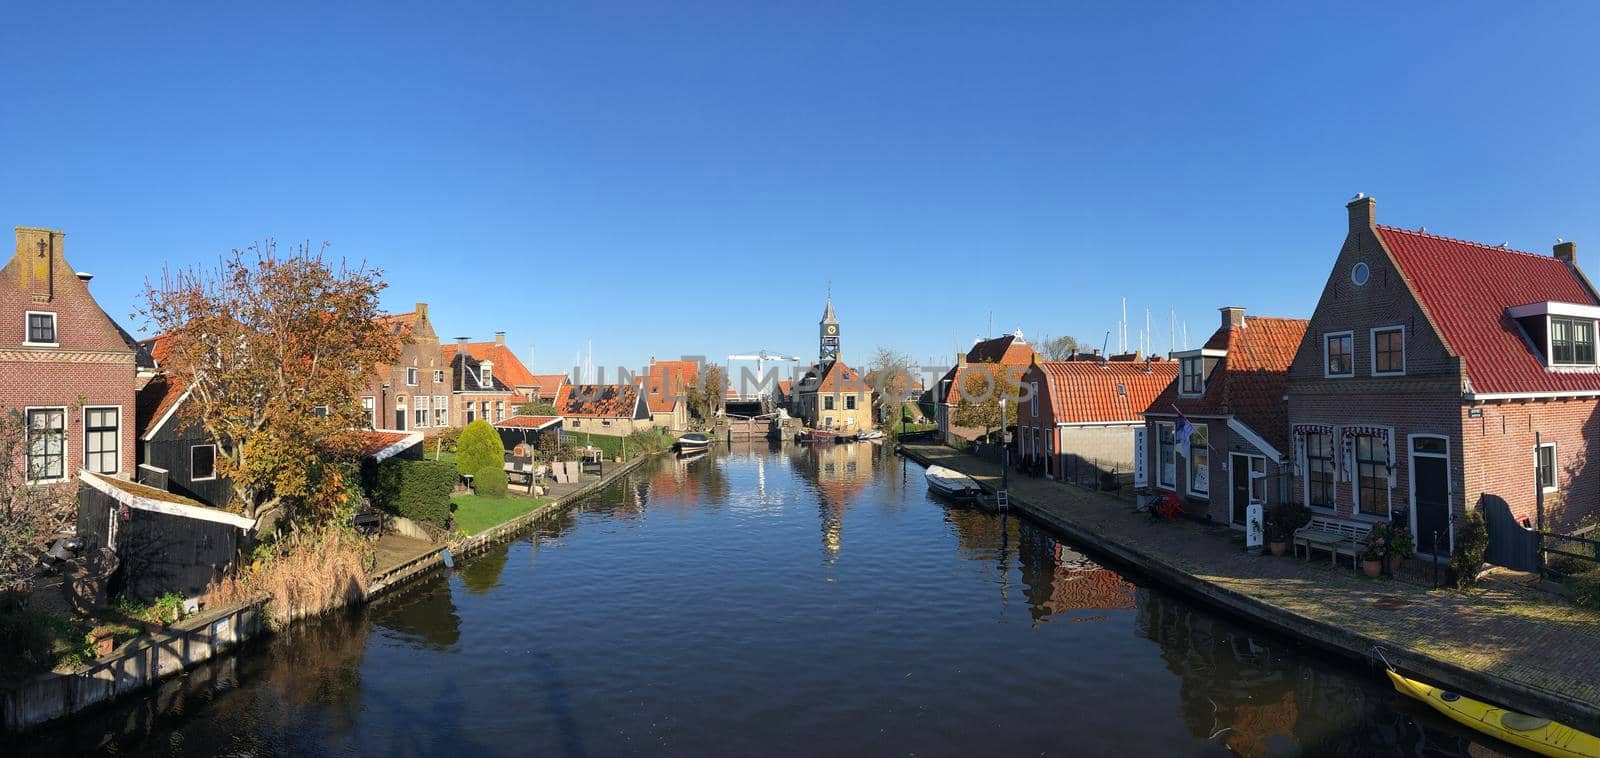 Panorama from a canal in Hindeloopen during autumn in Friesland, The Netherlands